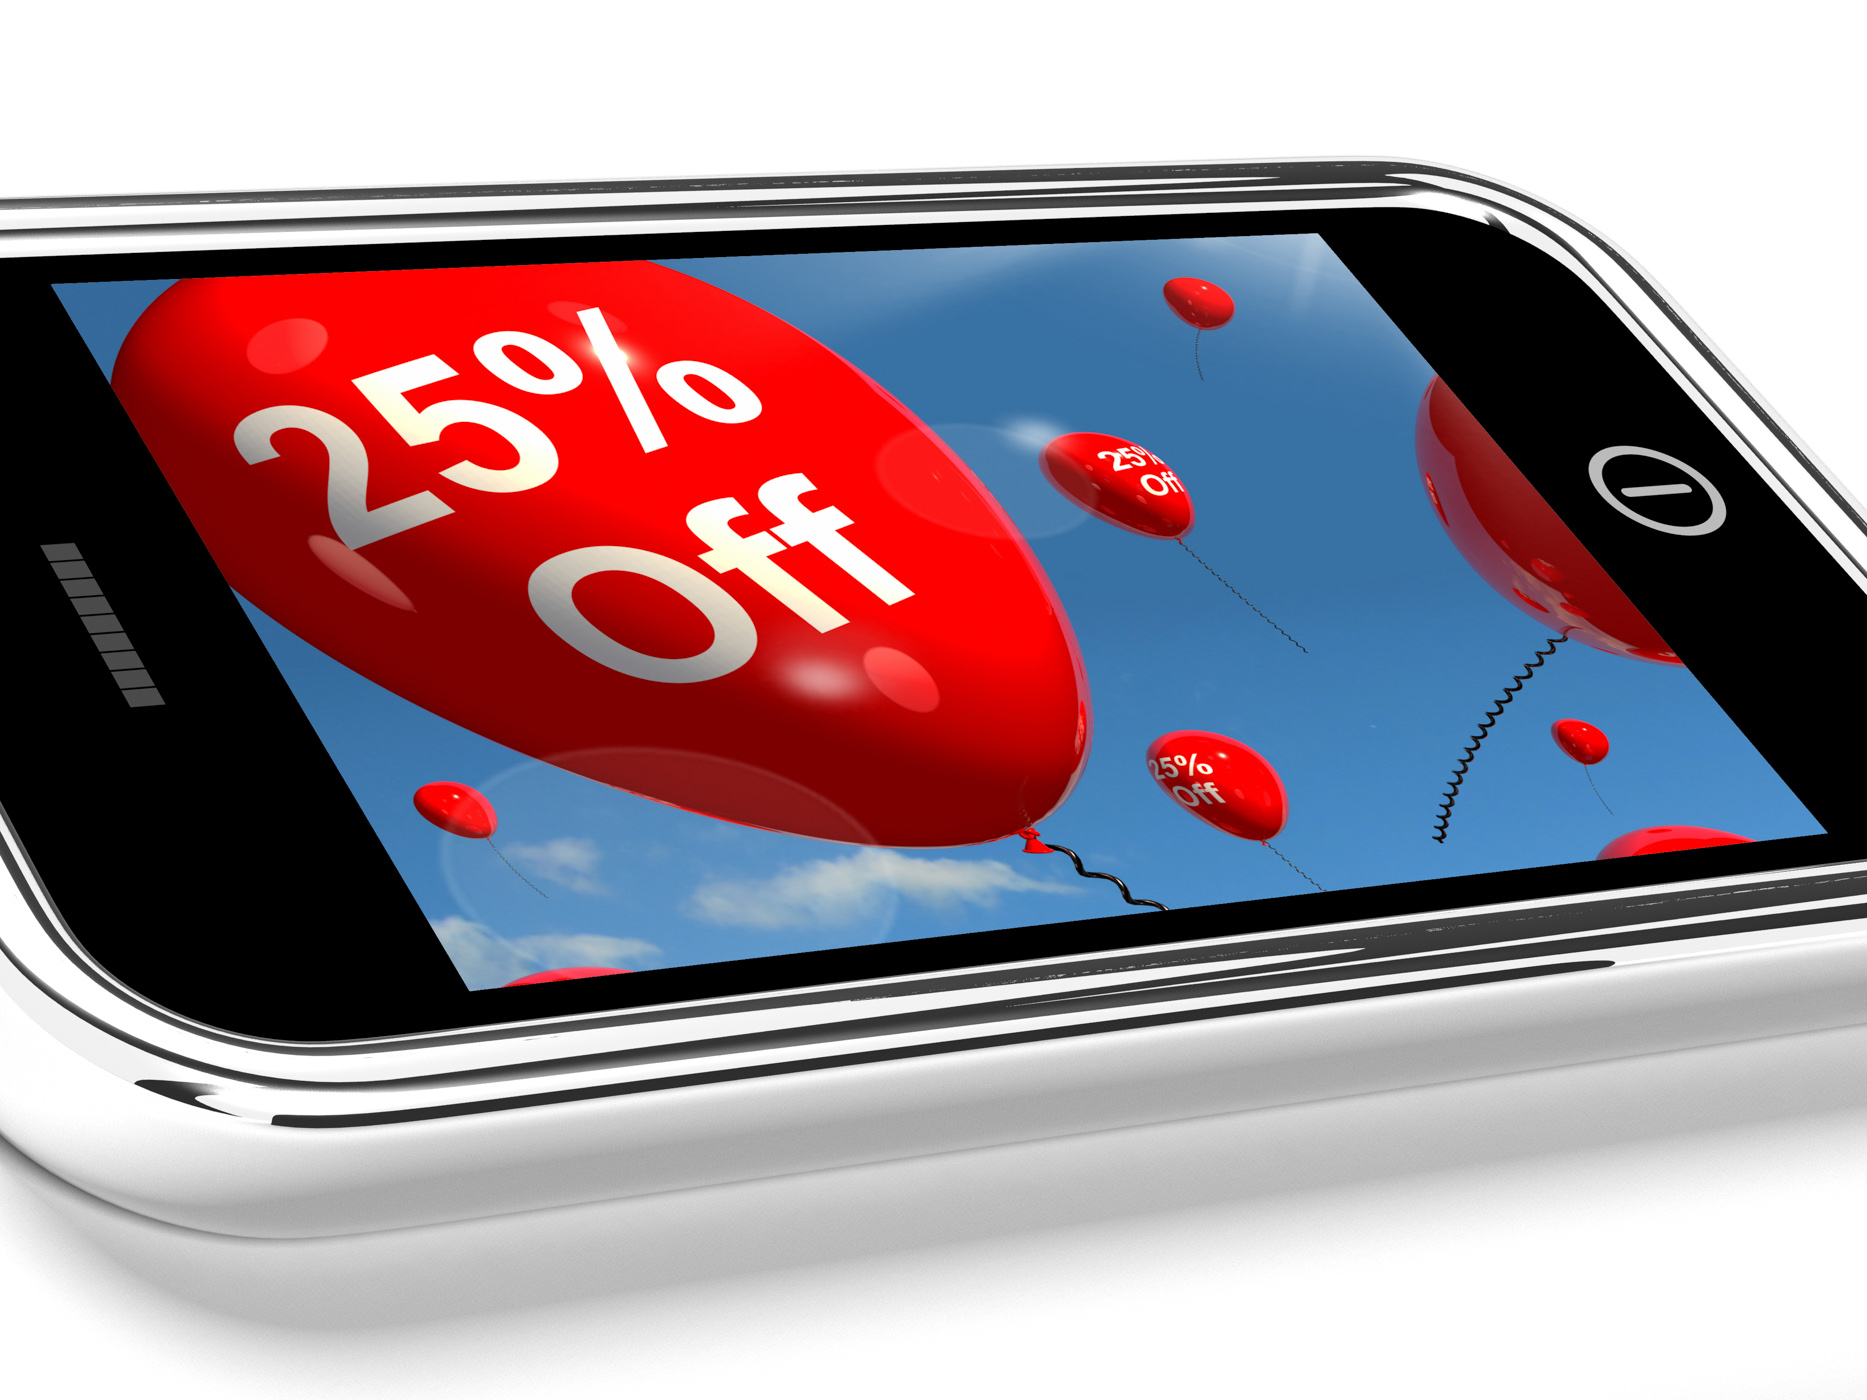 Mobile With 25 Off Sale Promotion Balloons, 25, Percentage, Web, Twenty, HQ Photo